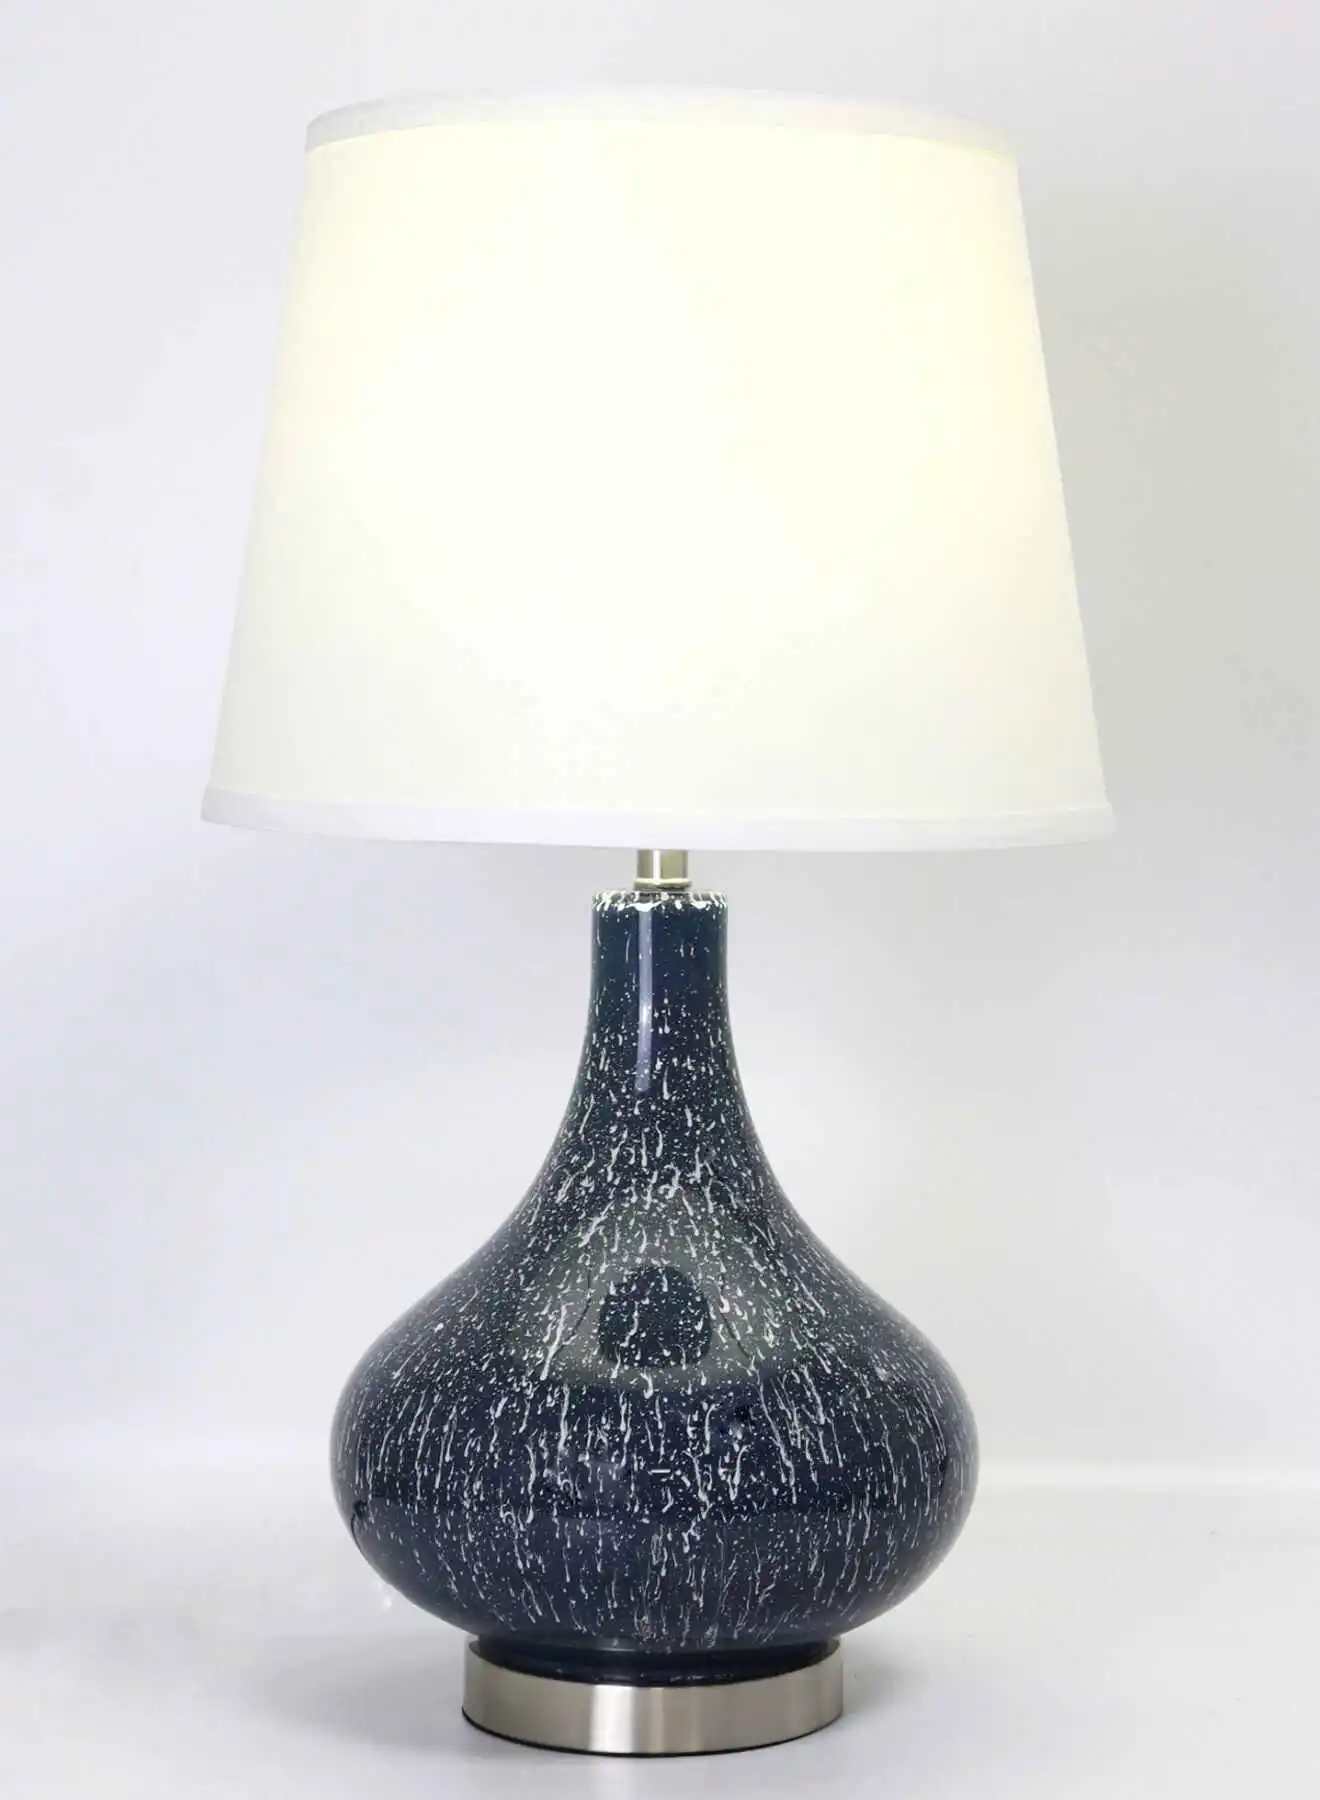 ebb & flow Modern Design Glass Table Lamp Unique Luxury Quality Material for the Perfect Stylish Home RSN71054-D Blue/White 13 x 22.5